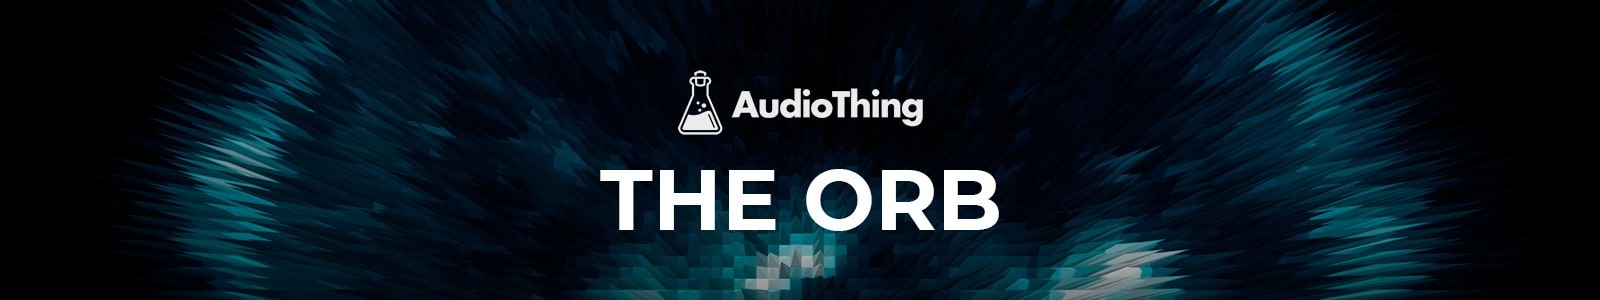 The Orb (VST2, VST3, AU, AAX) by AudioThing